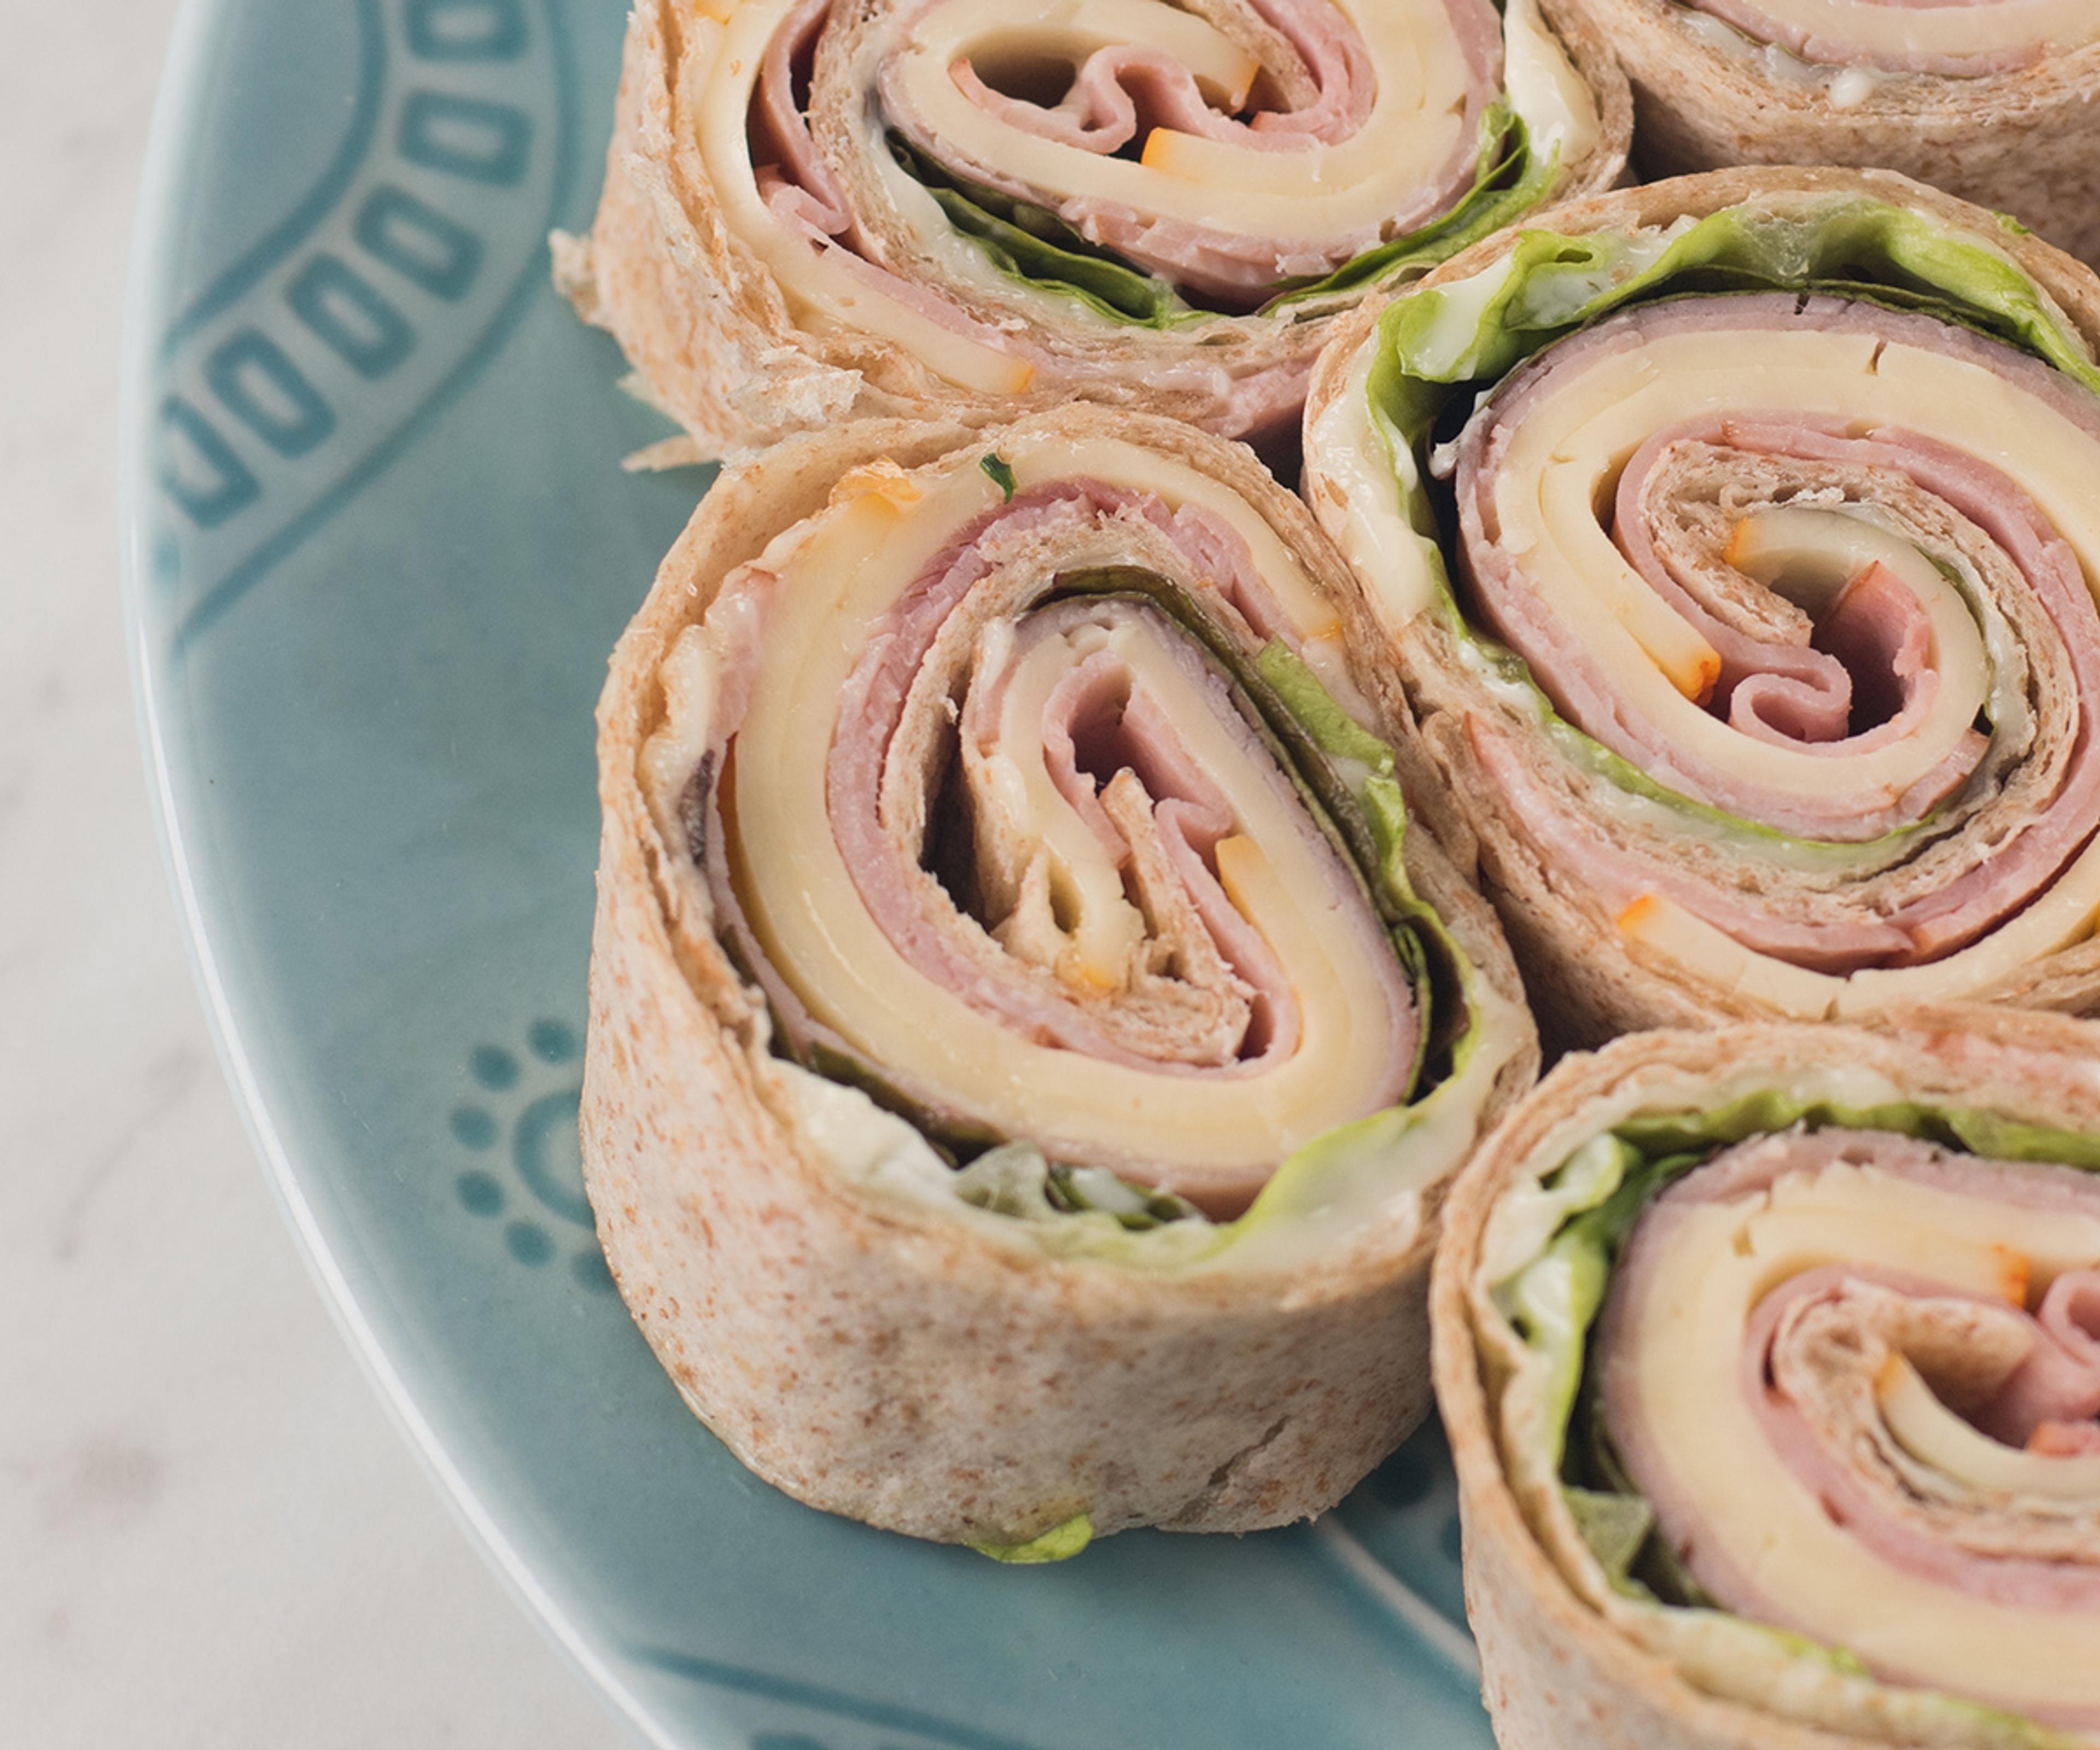 A wrap containing organic lunchmeat slices, sliced cheese and lettuce cut in slices and laid on a plate so they look like pinwheels.